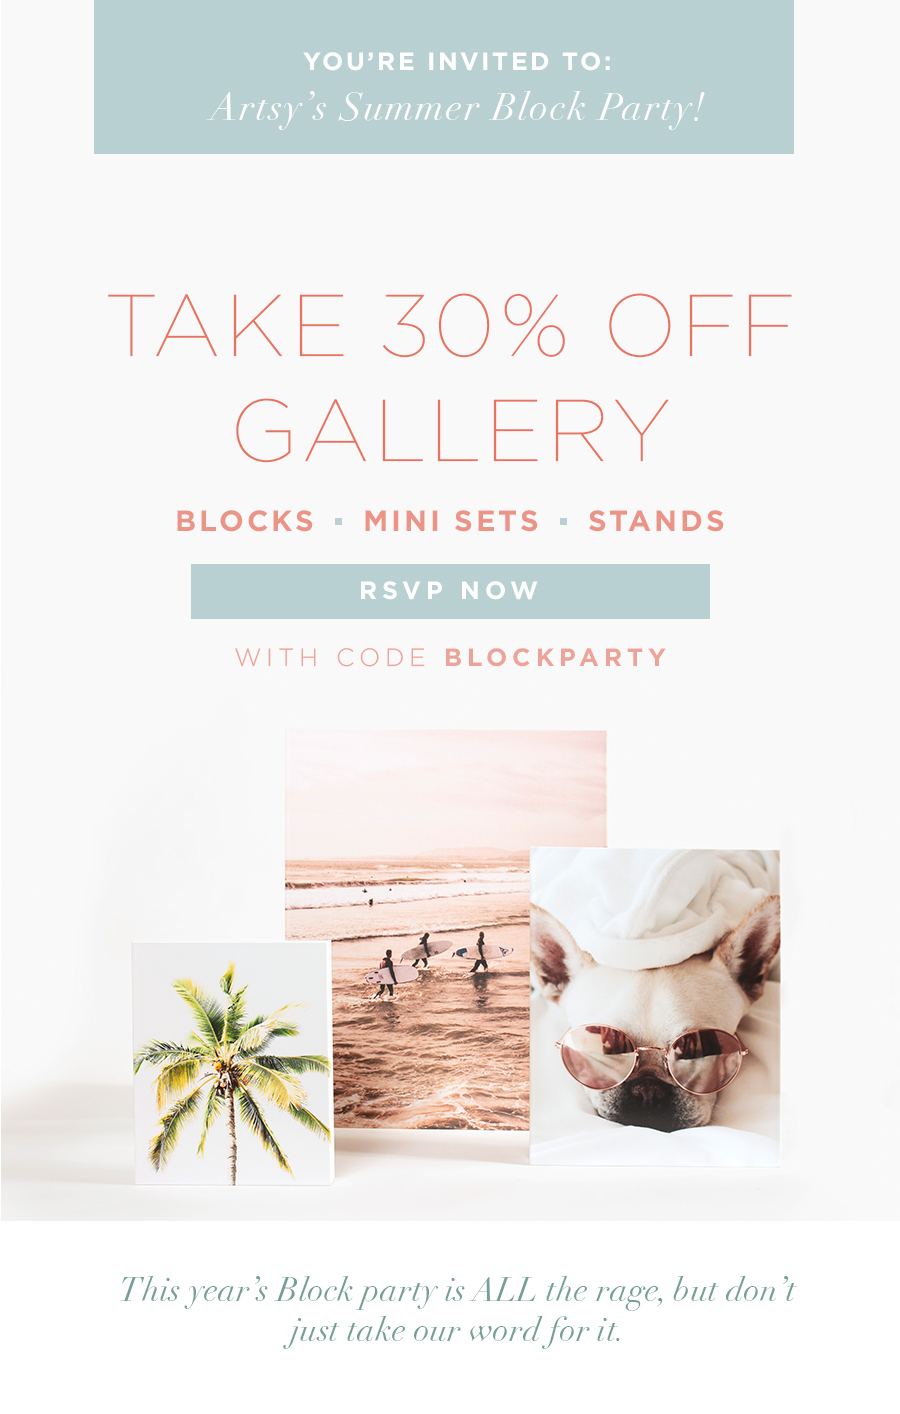 You're Invited to:   Artsy's Summer Block Party!  Take 30% Off Gallery Blocks Mini Sets Stands  with code BLOCKPARTY